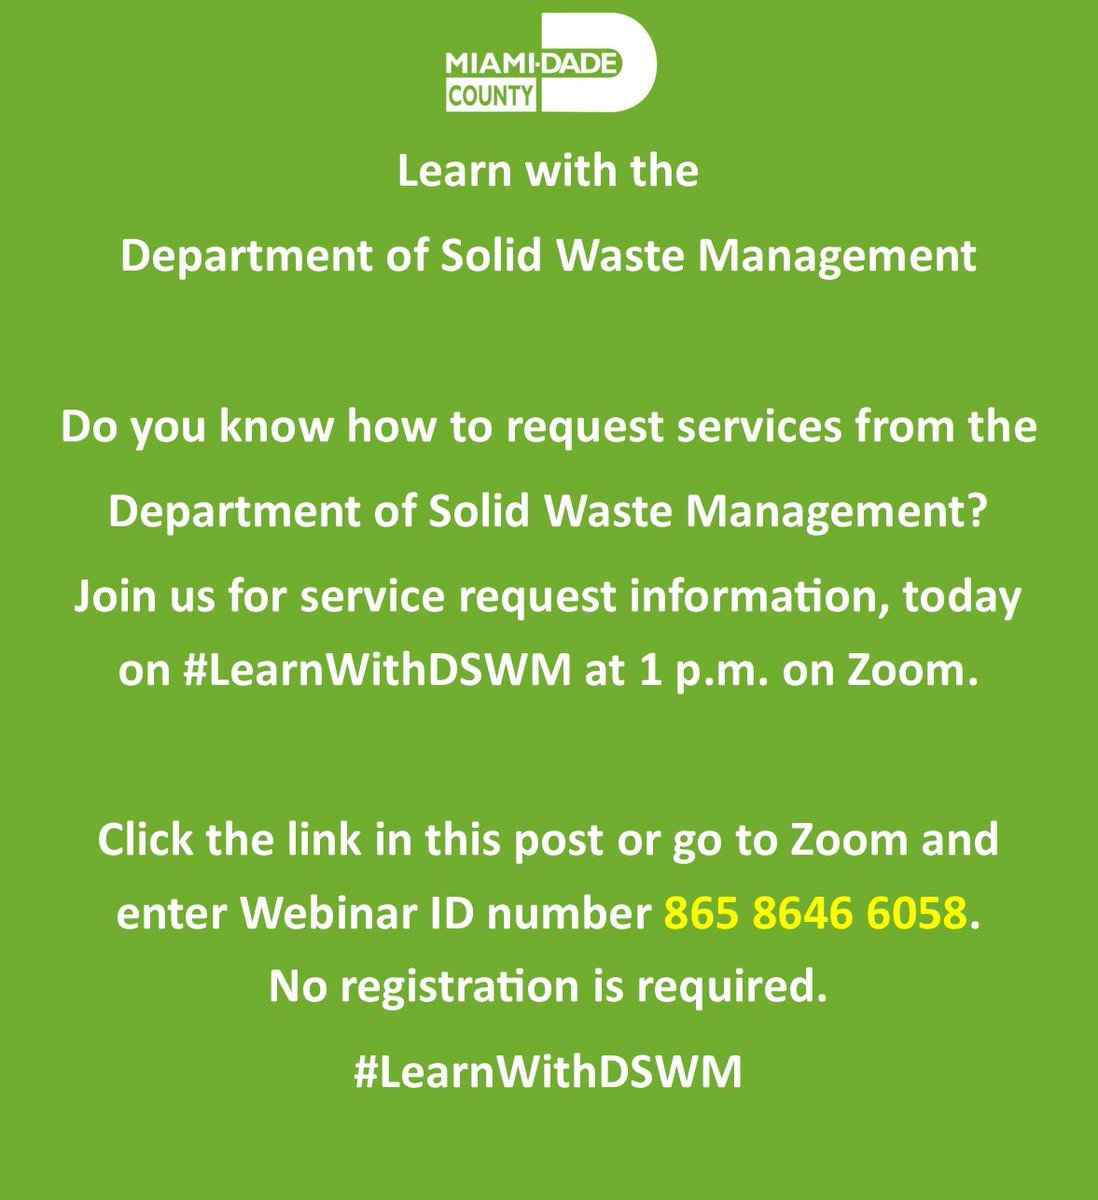 Join us for service request info, on #LearnWithDSWM today at 1 p.m. on Zoom. Visit miamidade.zoom.us/j/86586466058 to join or go to Zoom and enter Webinar ID number 865 8646 6058. No need to register. Can't watch live? - Watch on demand at bddy.me/3XtZIUk.